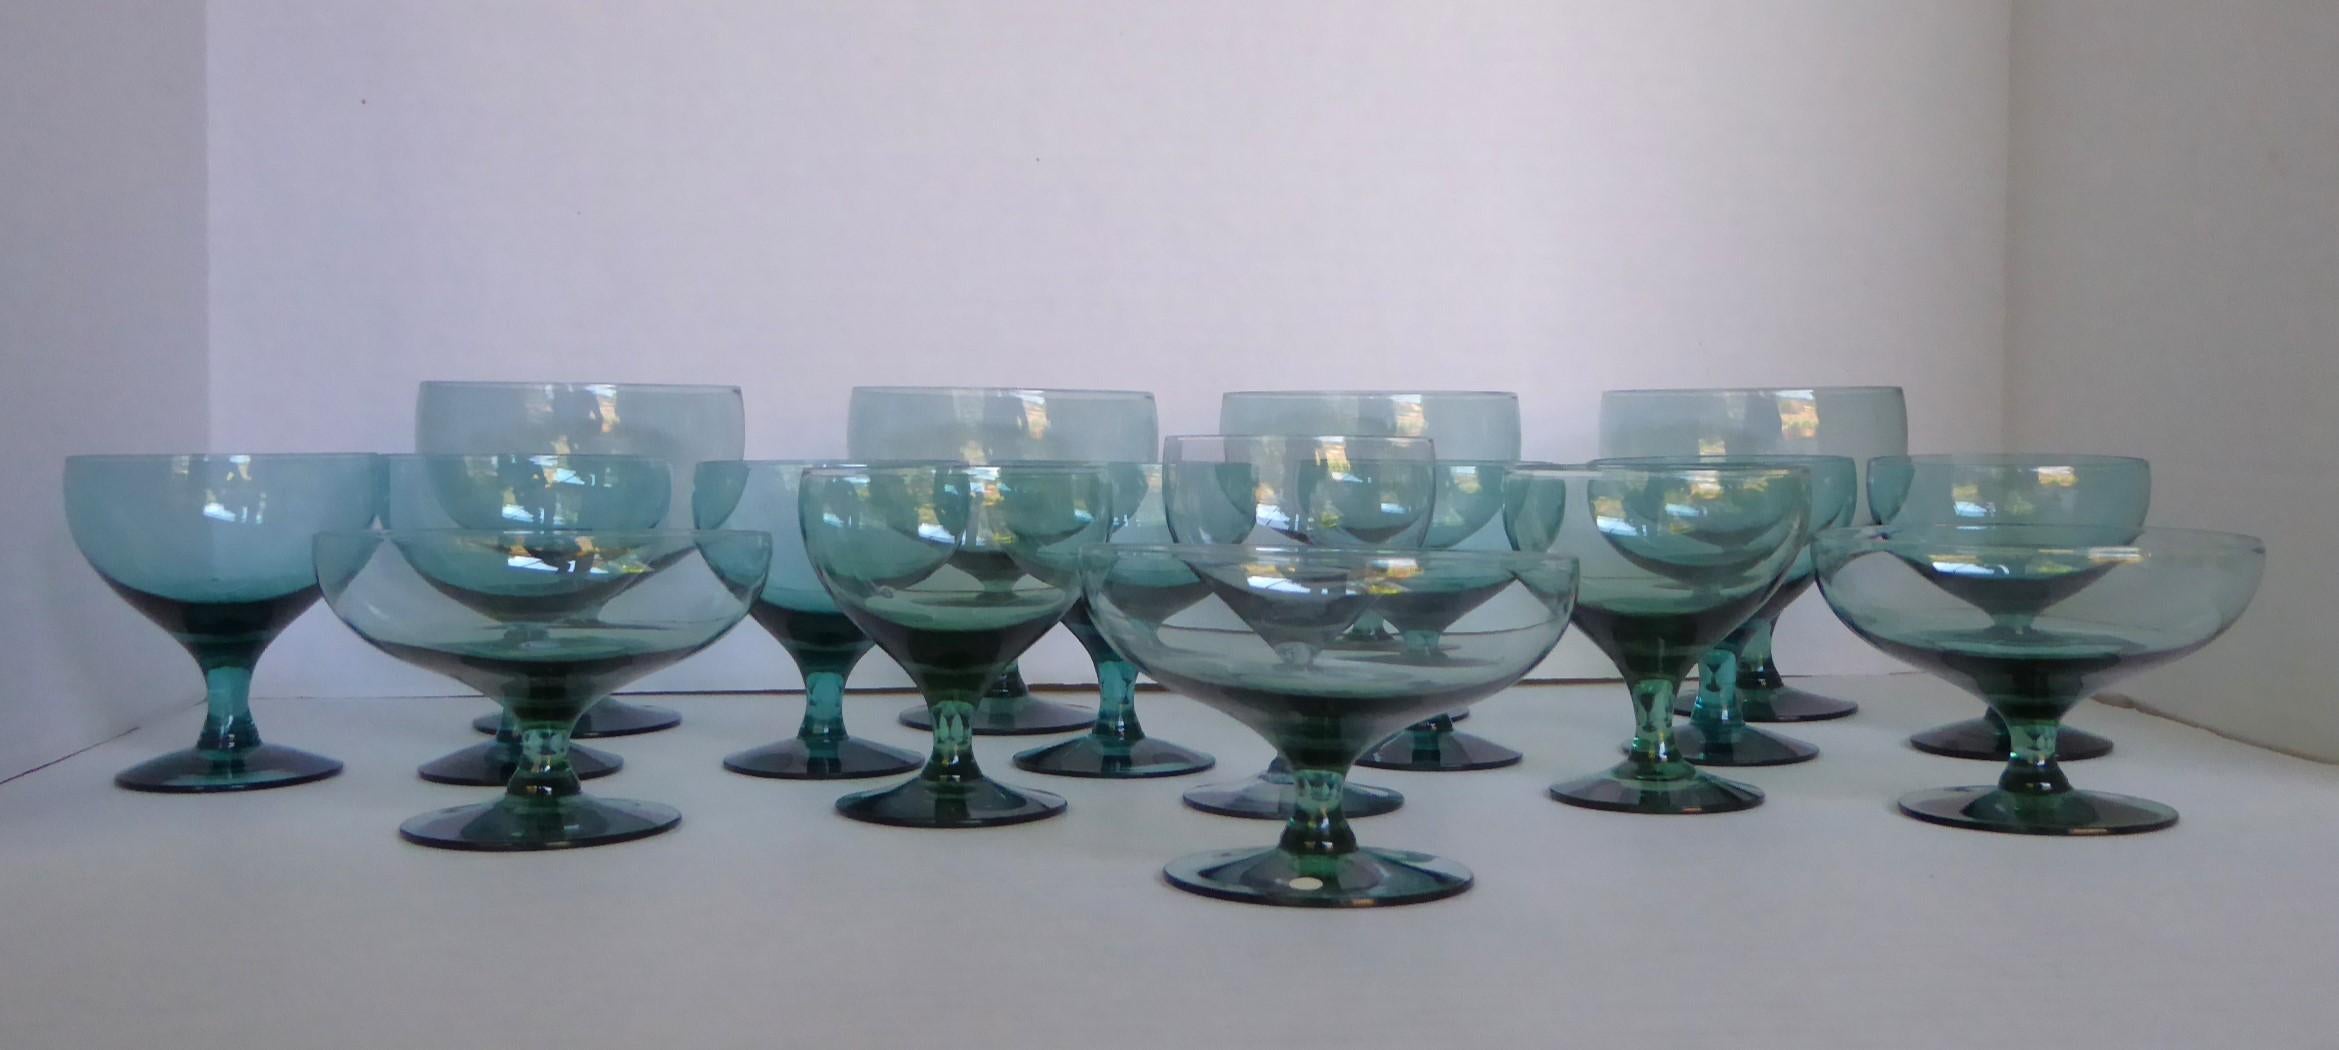 Mid Century grouping of 16 Seafoam American Modern goblets designed by Russel Wright and manufactured by Morgantown. Consisting of Seafoam stem glasses in three different sizes in Very Good condition but one dessert with chip on base  (see pic).